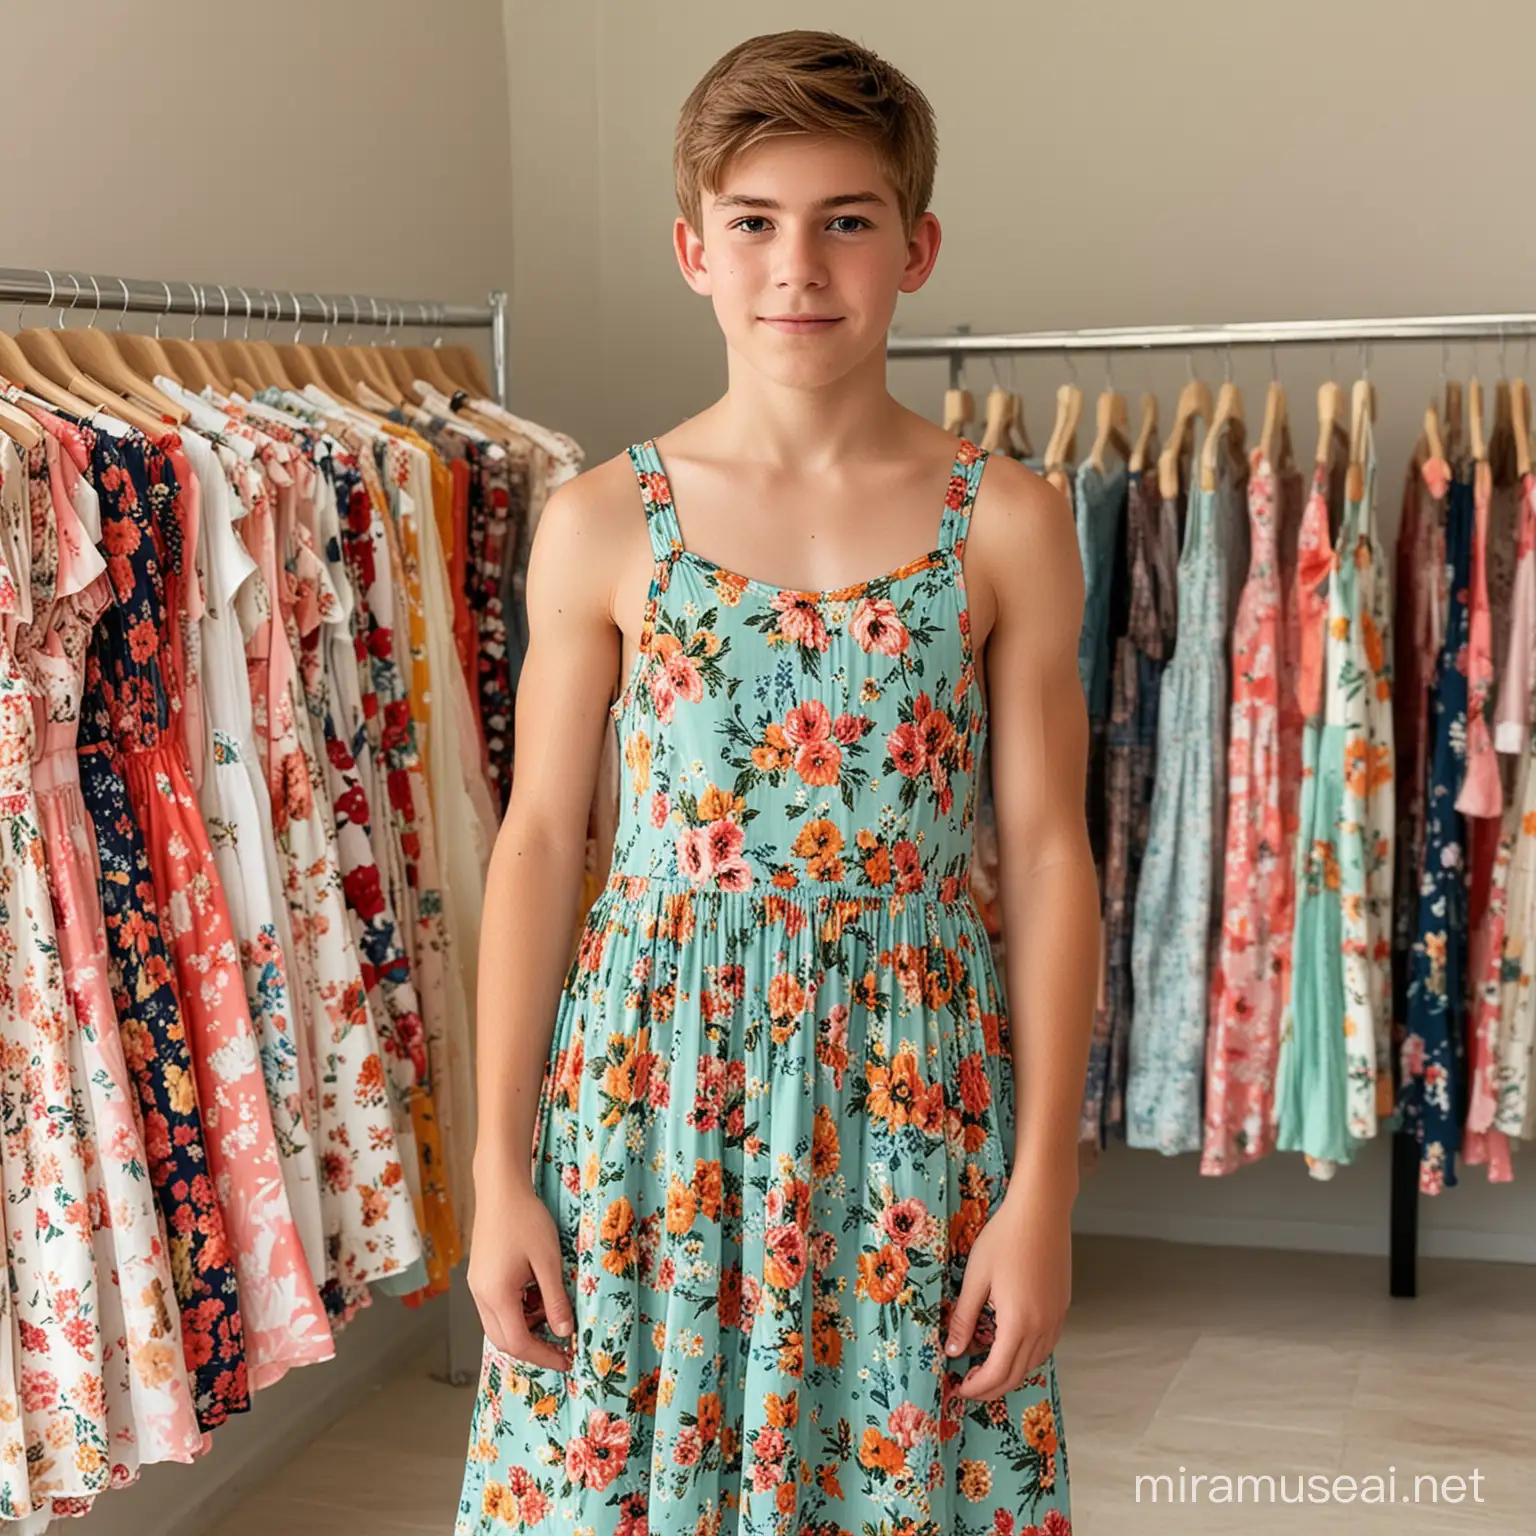 Teenage Boy Trying Floral ALine Summer Dress in Boutique